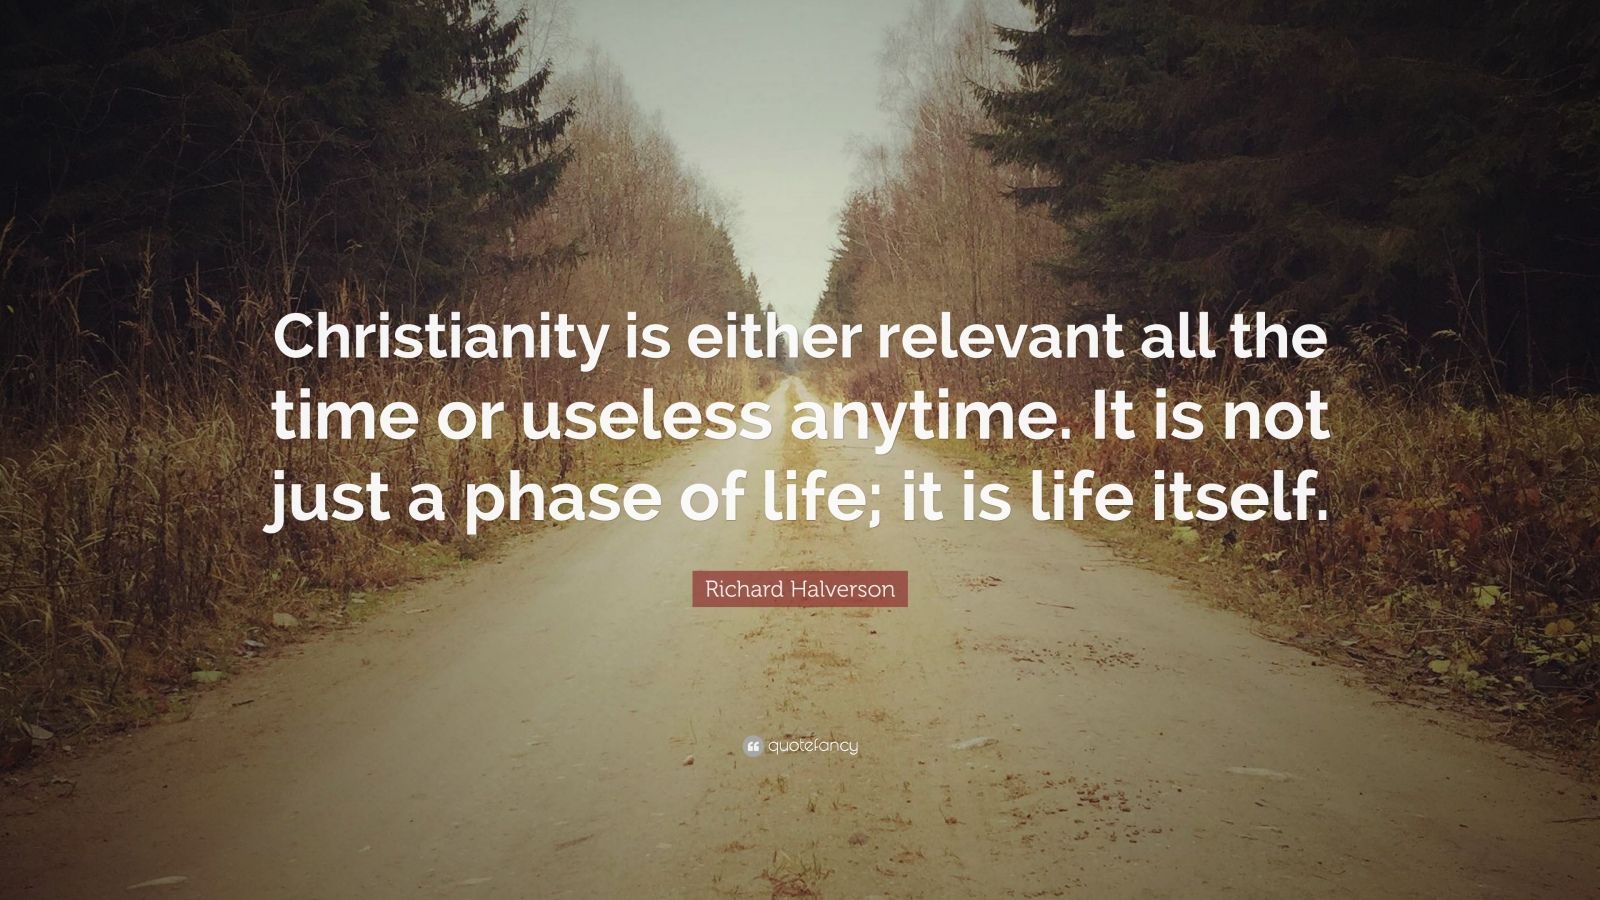 Richard Halverson Quote: “Christianity is either relevant all the time